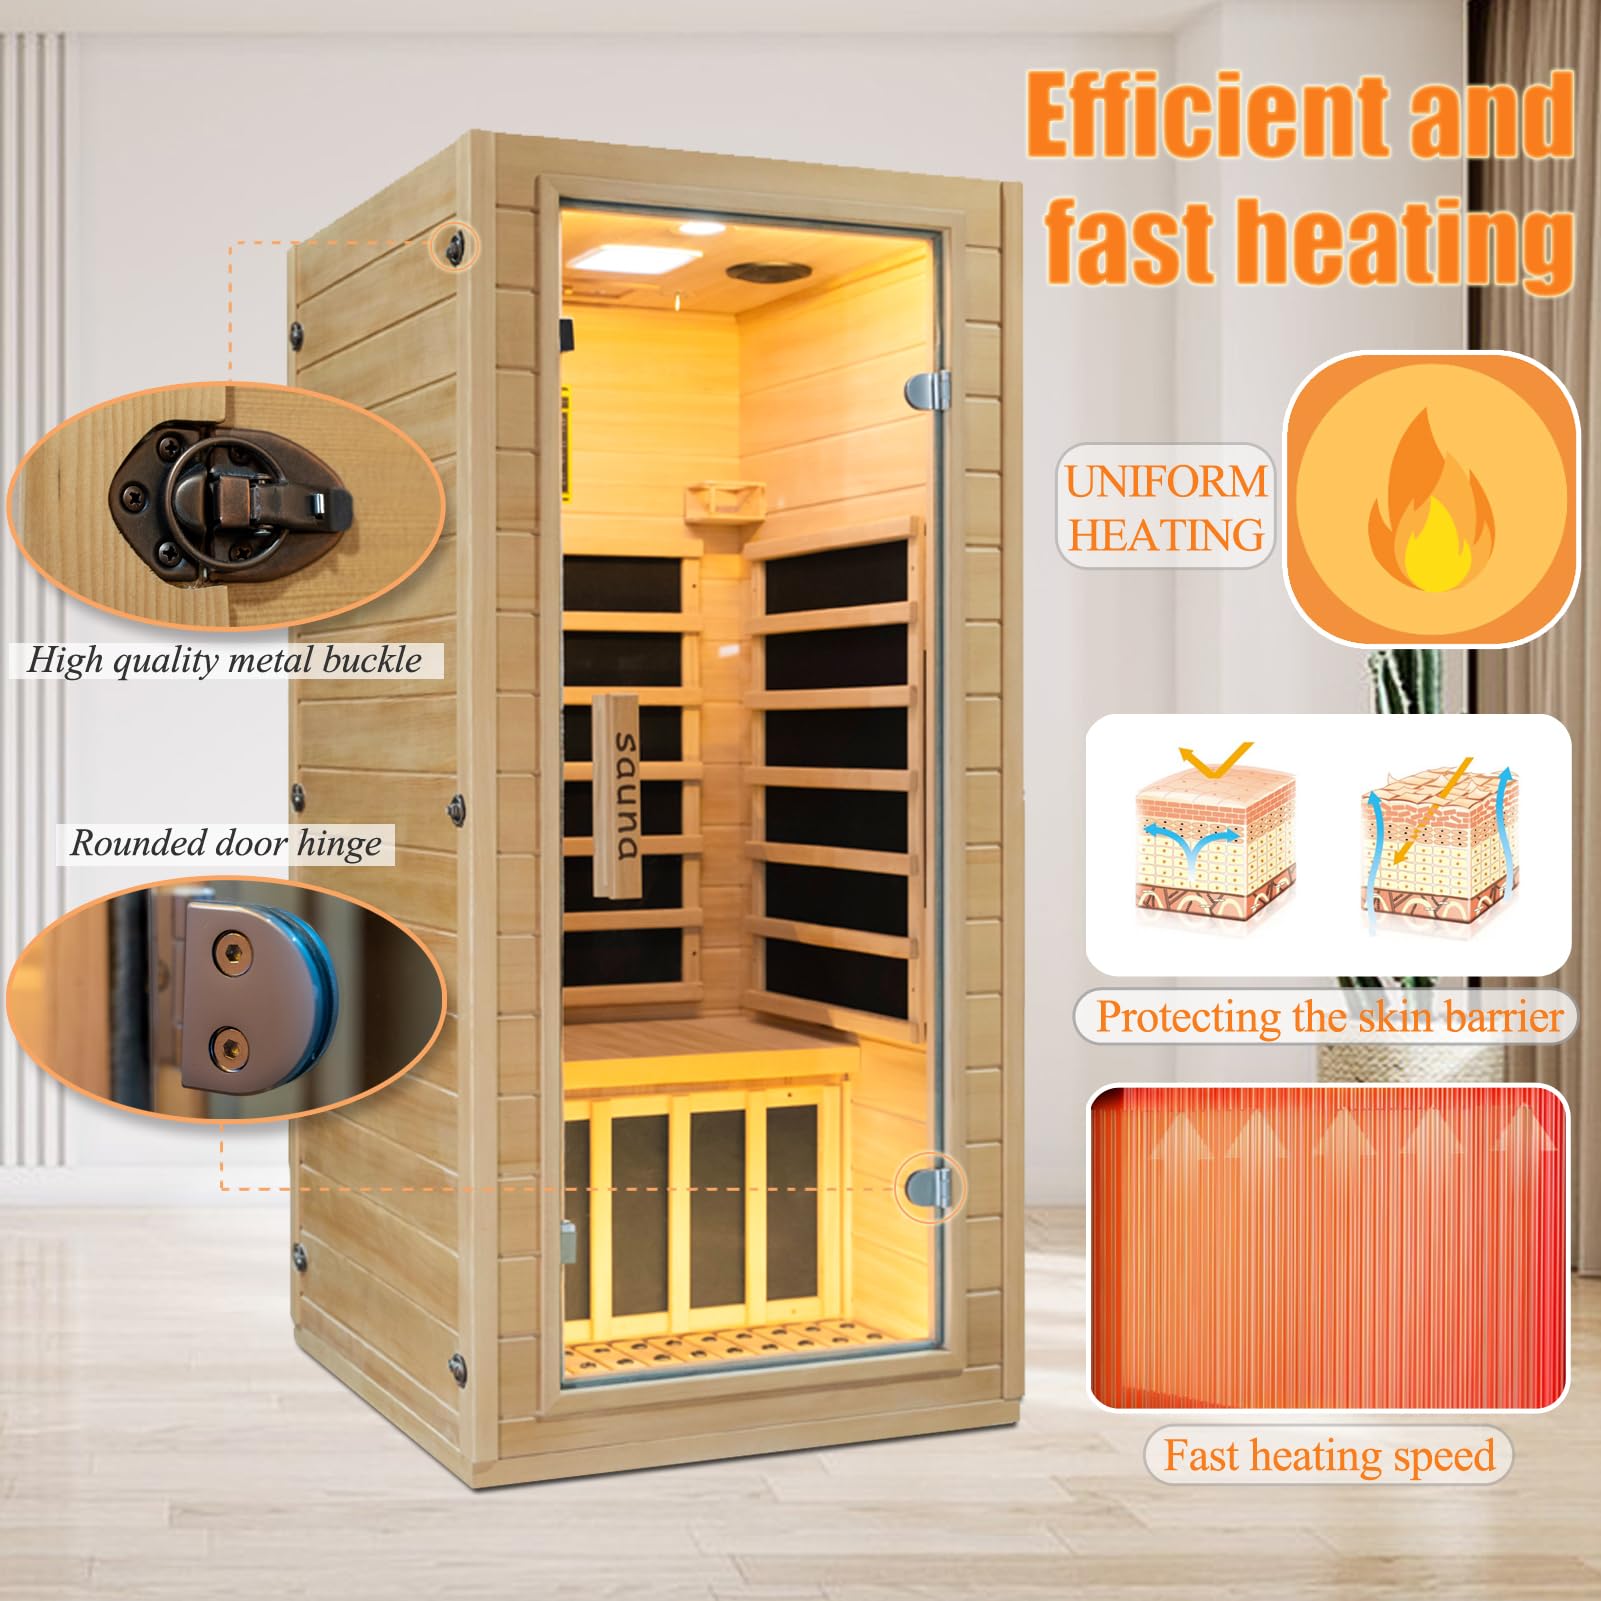 Infrared Home Sauna Room 1 Person Hemlock Wooden Indoor Sauna Spa，1200W/110V Heaters,10 Minutes Pre-Warm up,Time and Temp Pre-Set, New Year Gifts